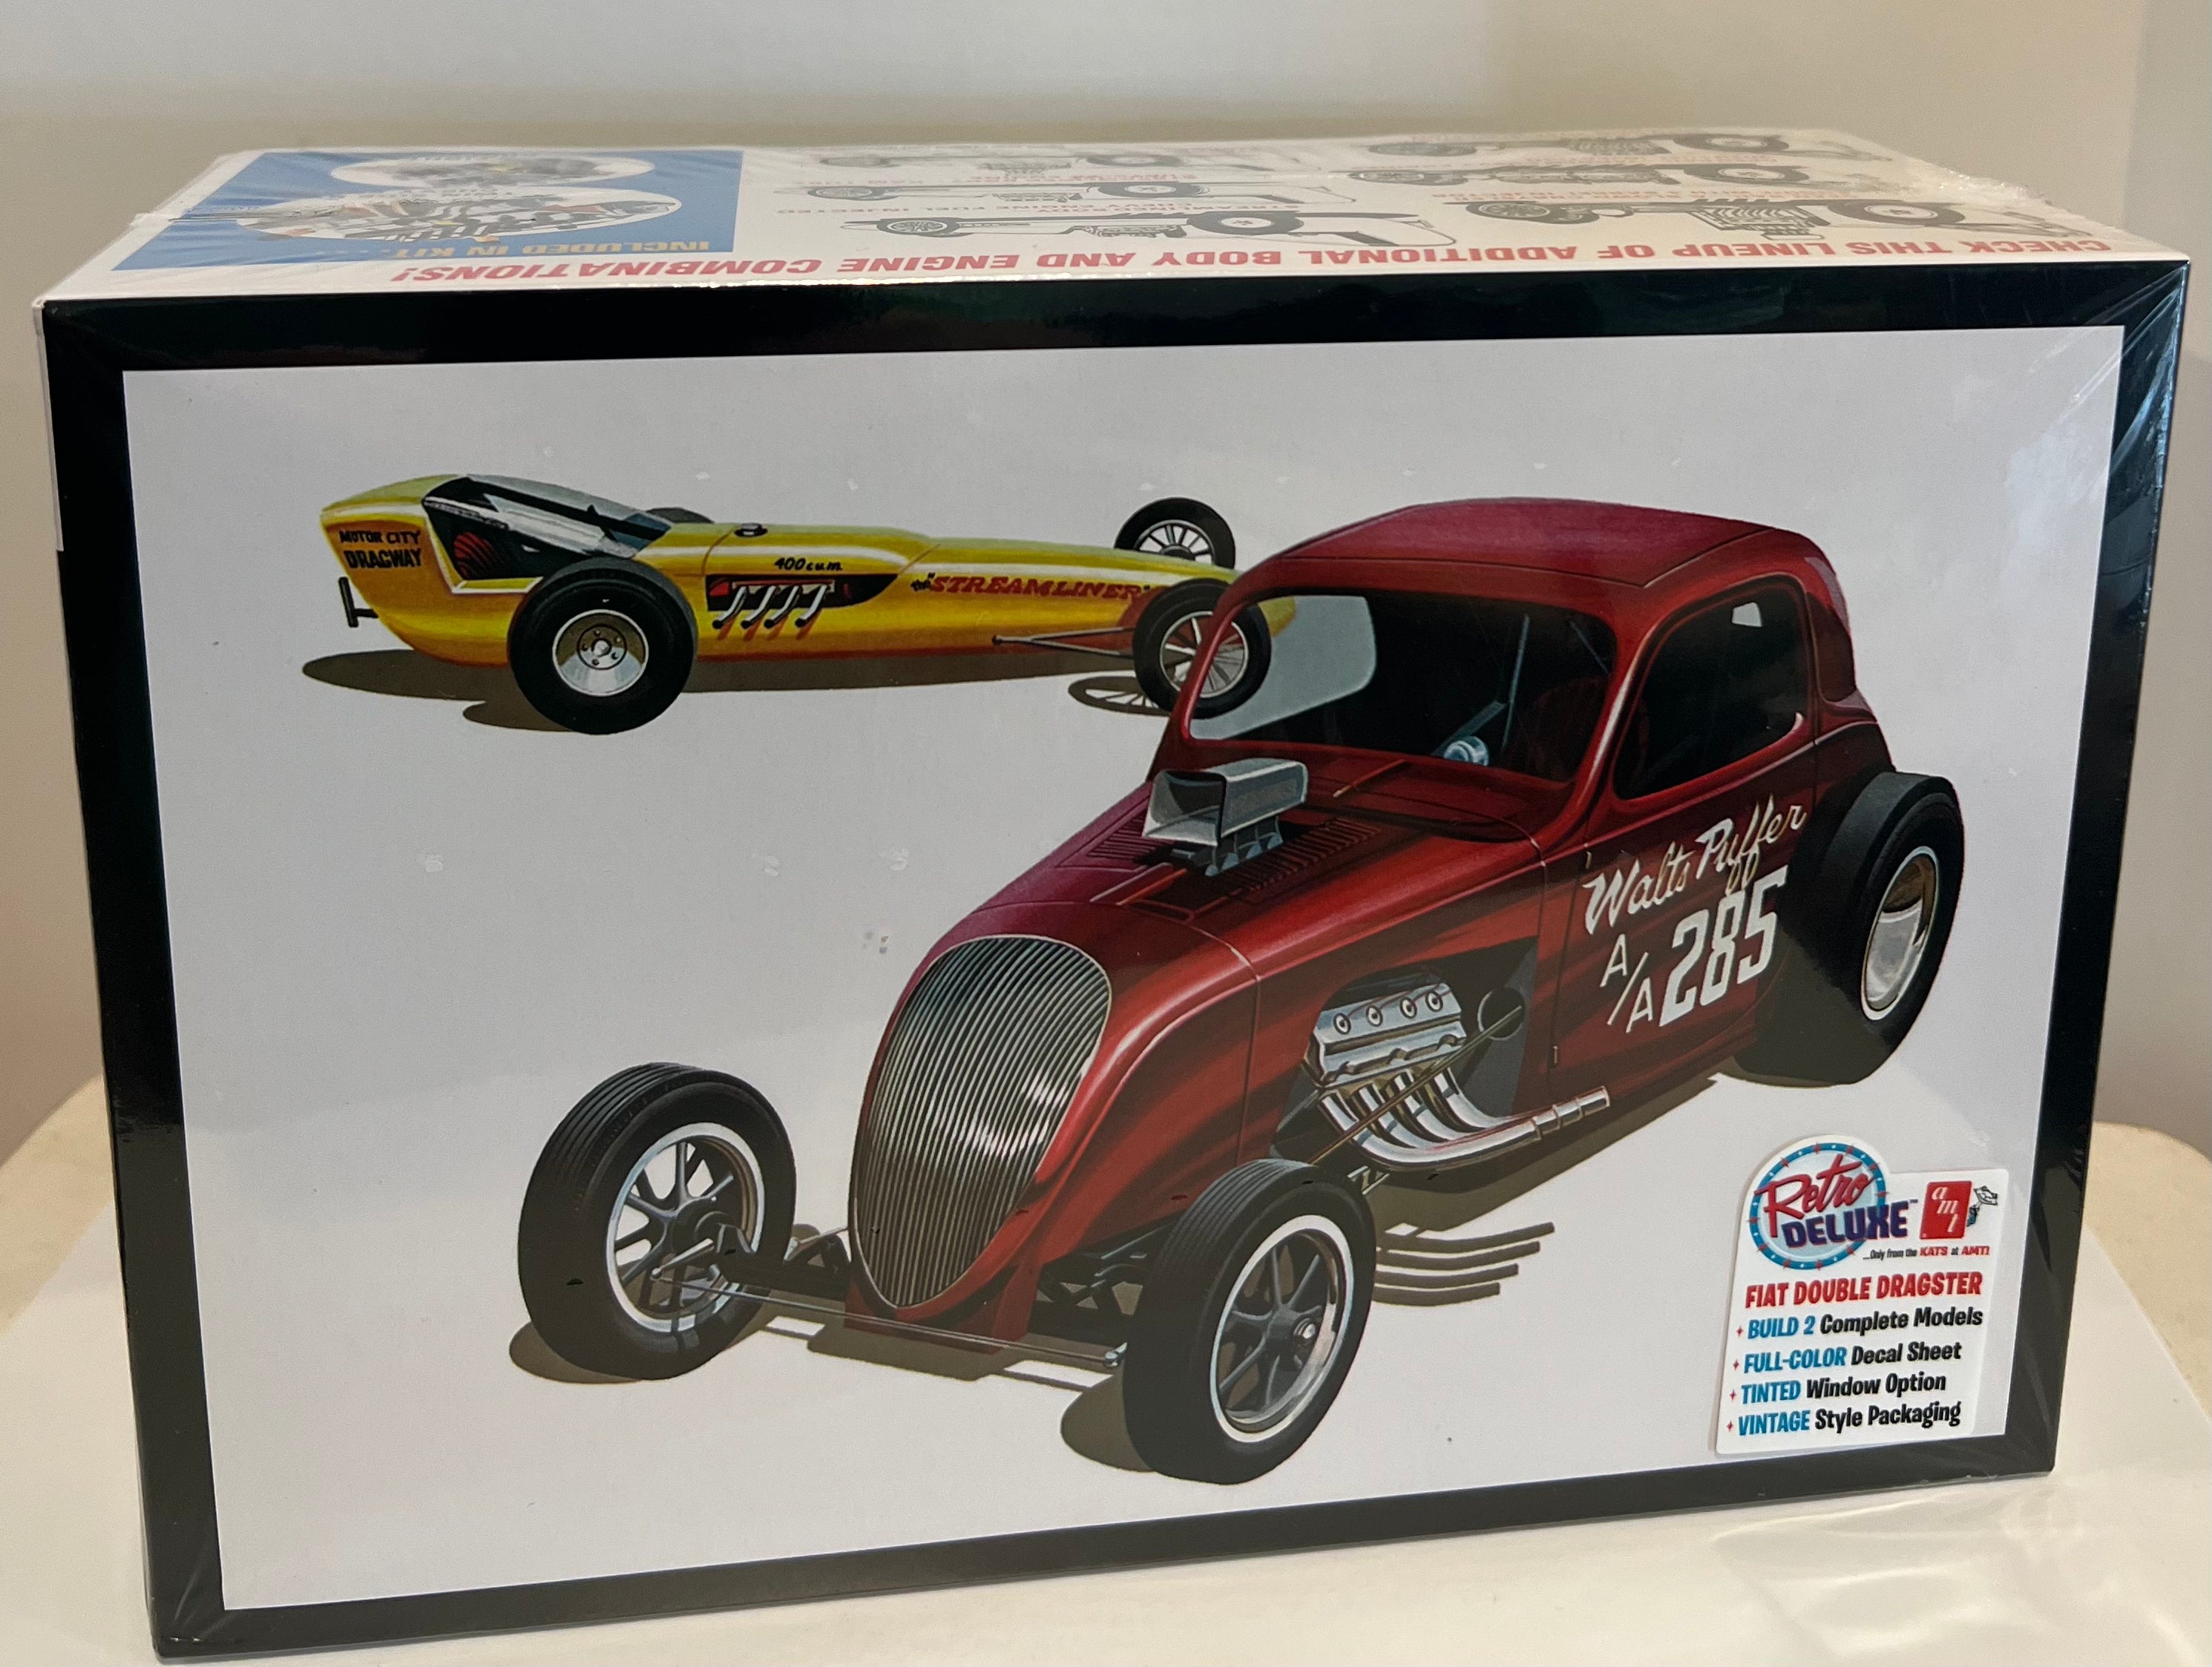 AMT #1380 Fiat Double Dragster kit – WesModelCarCorner